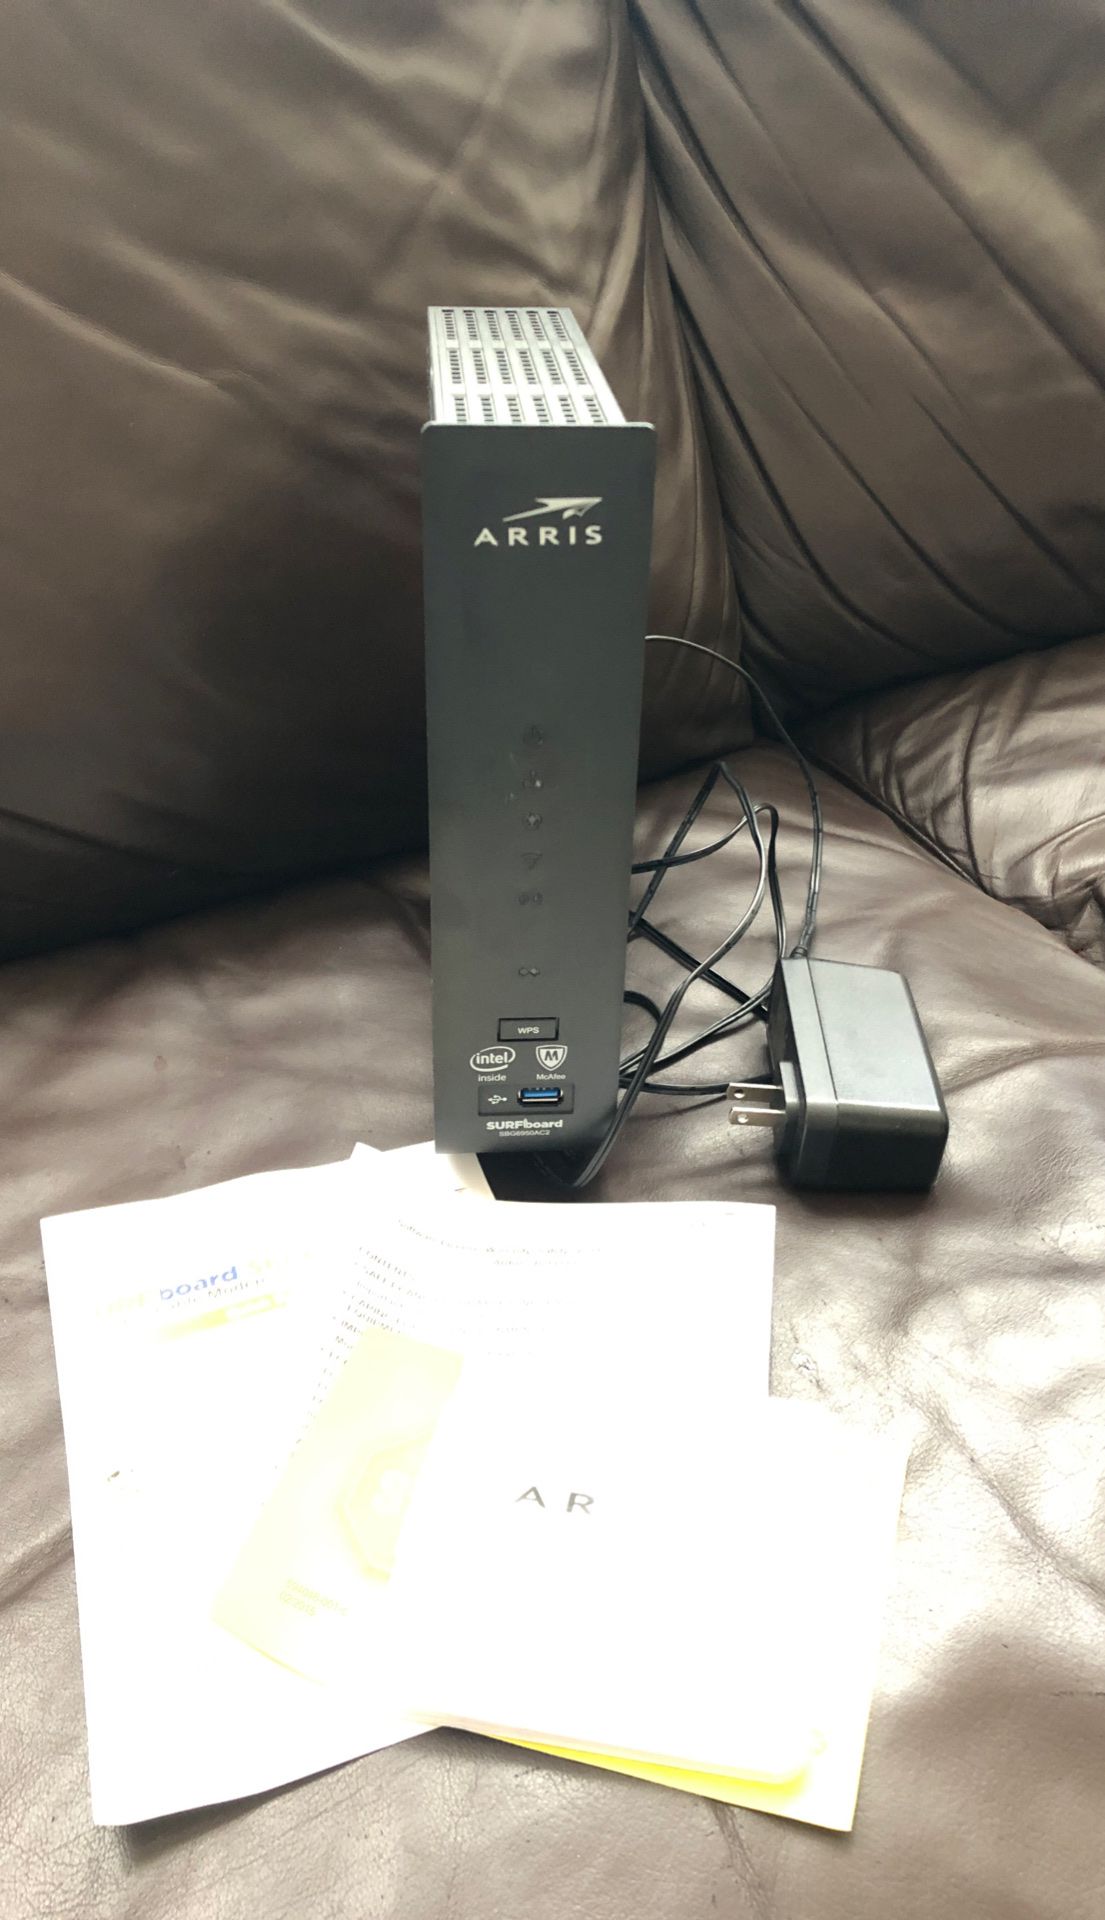 Arris wireless router